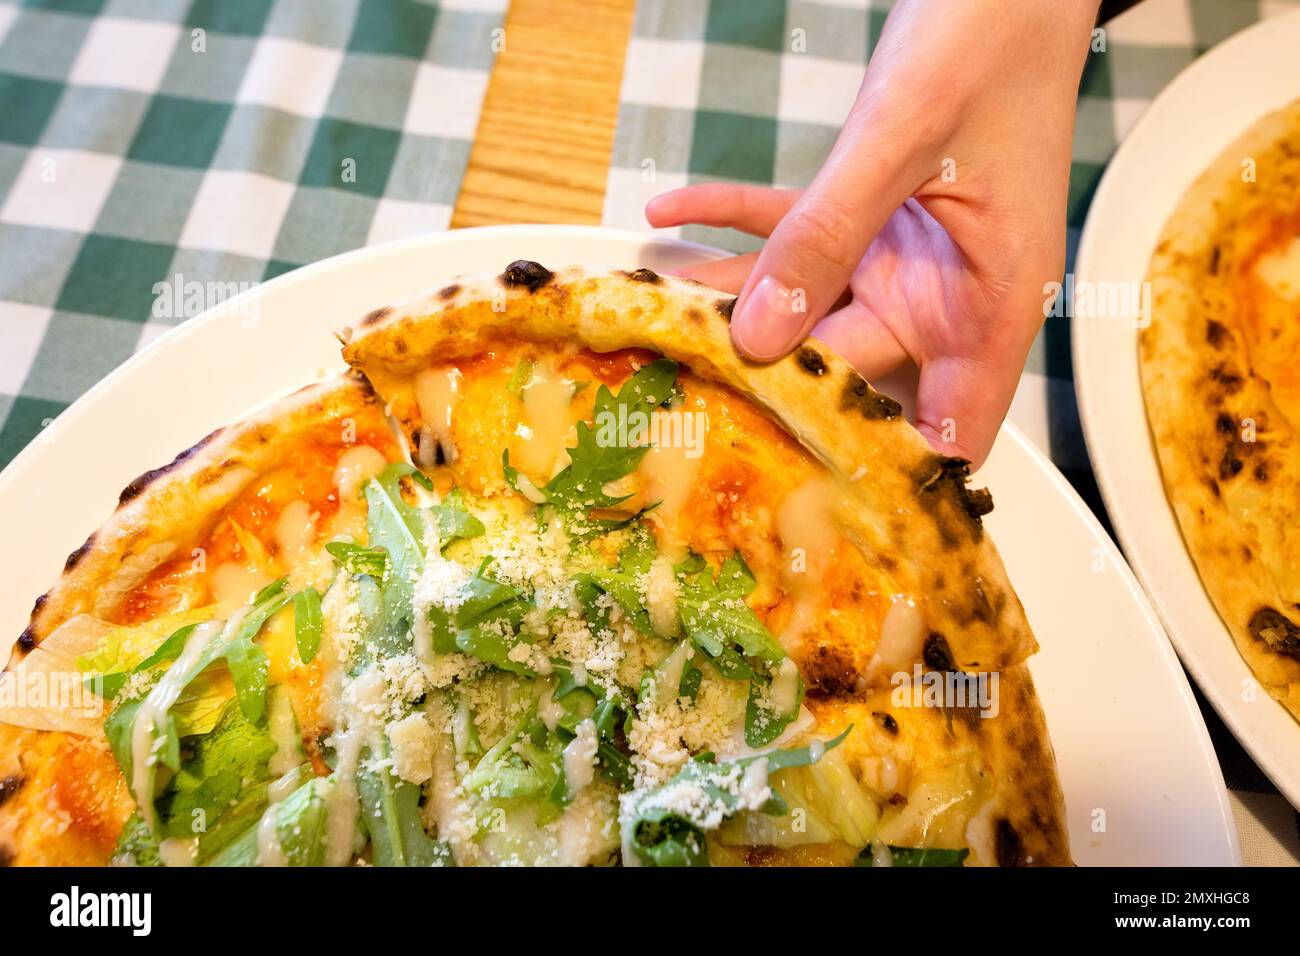 Female hands taking slices of authentic Italian caesar stone oven pizza with arugula, sauce, grilled chicken, herbs and spicy parmesan cheese. Stock Photo